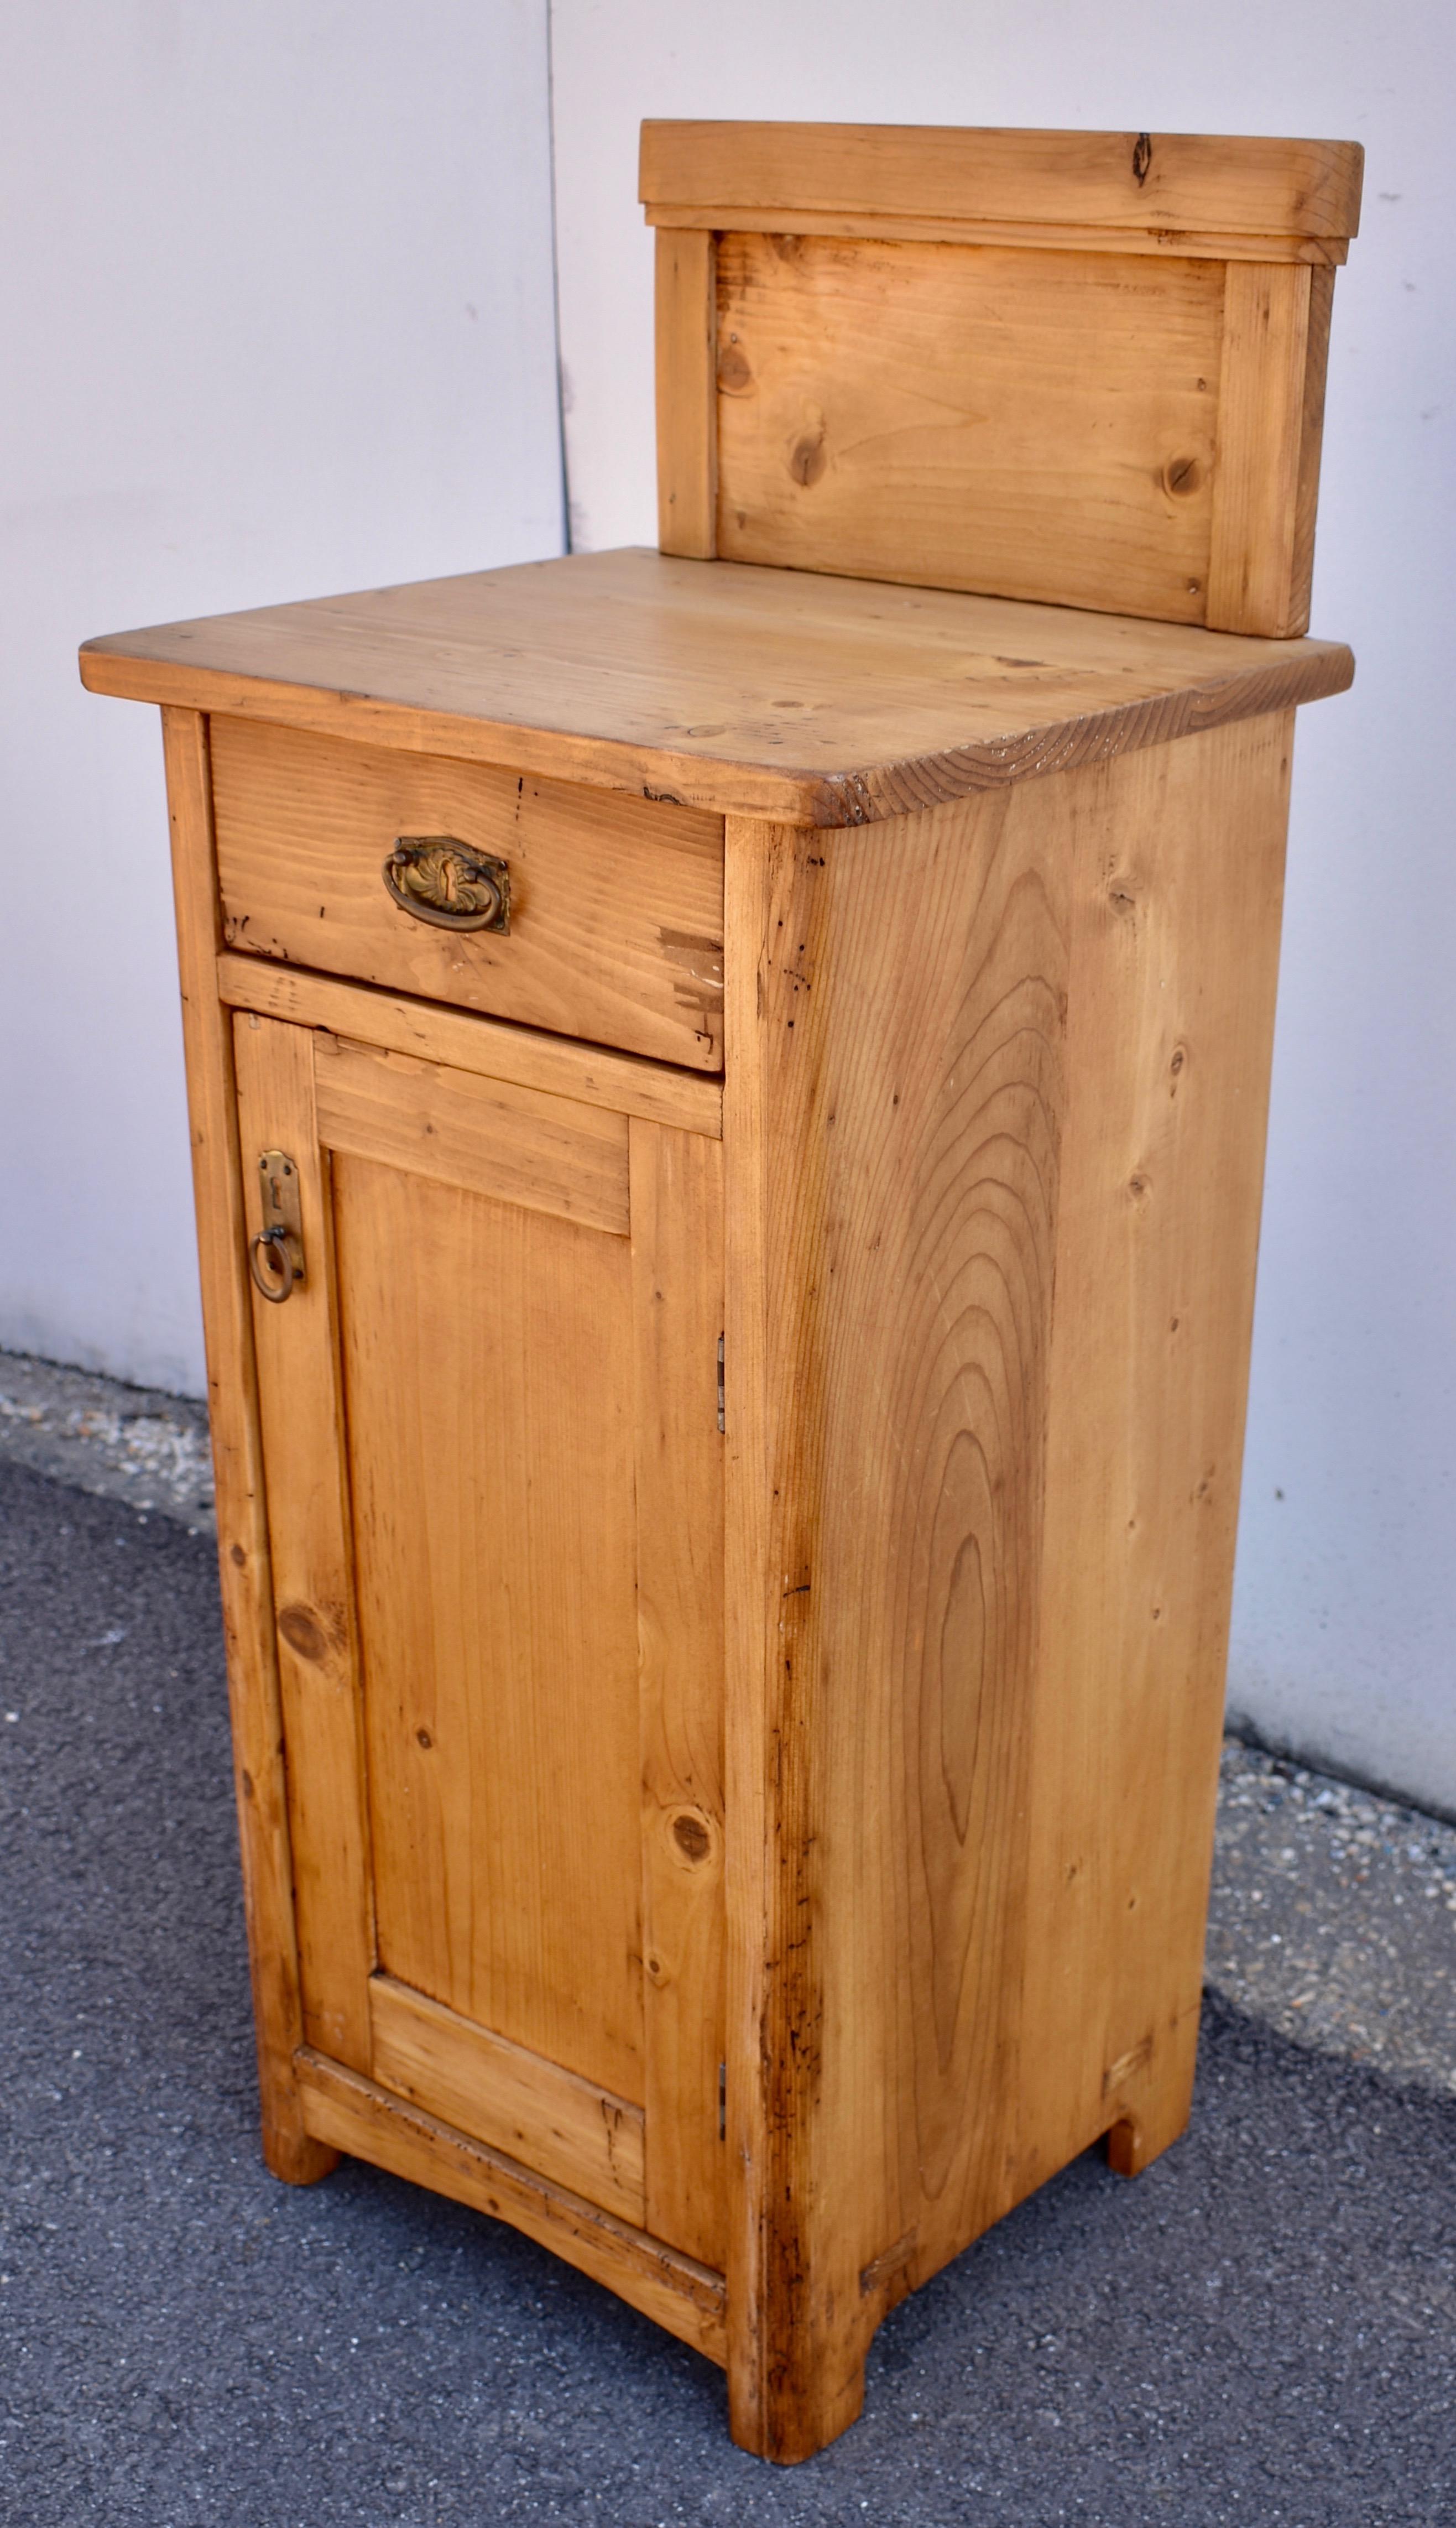 This plain and simple pine nightstand has an 8” high removable splashback to give it a 39.5” total height.  Bearing some of the scars of decades of purposeful use-some chips off the drawer front and some small dings here and there, we think this